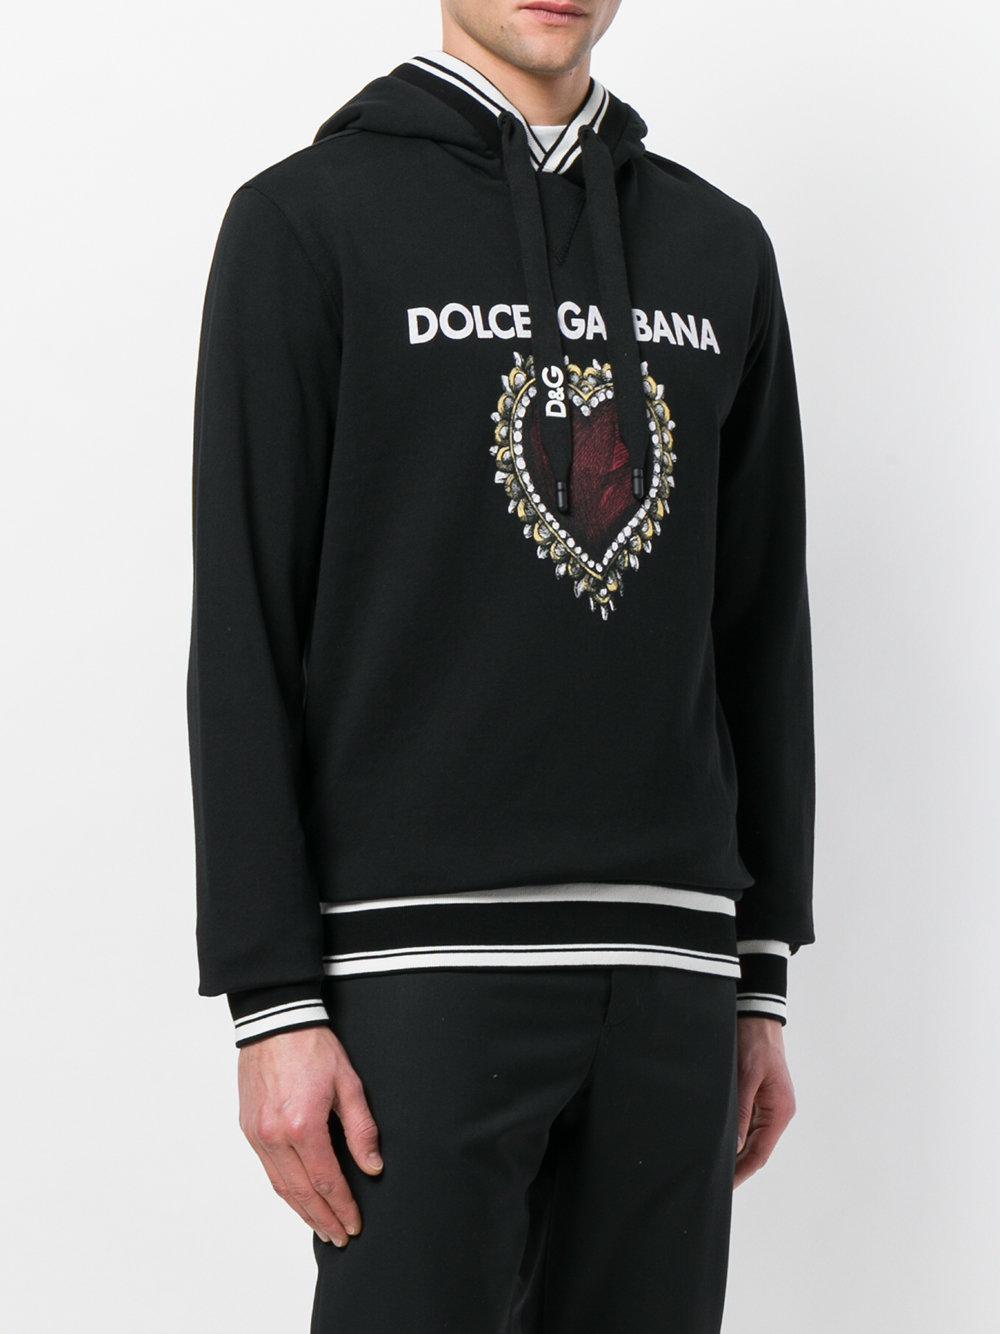 Dolce & Gabbana Cotton Sacred Heart Print Hoodie in Black for Men - Lyst